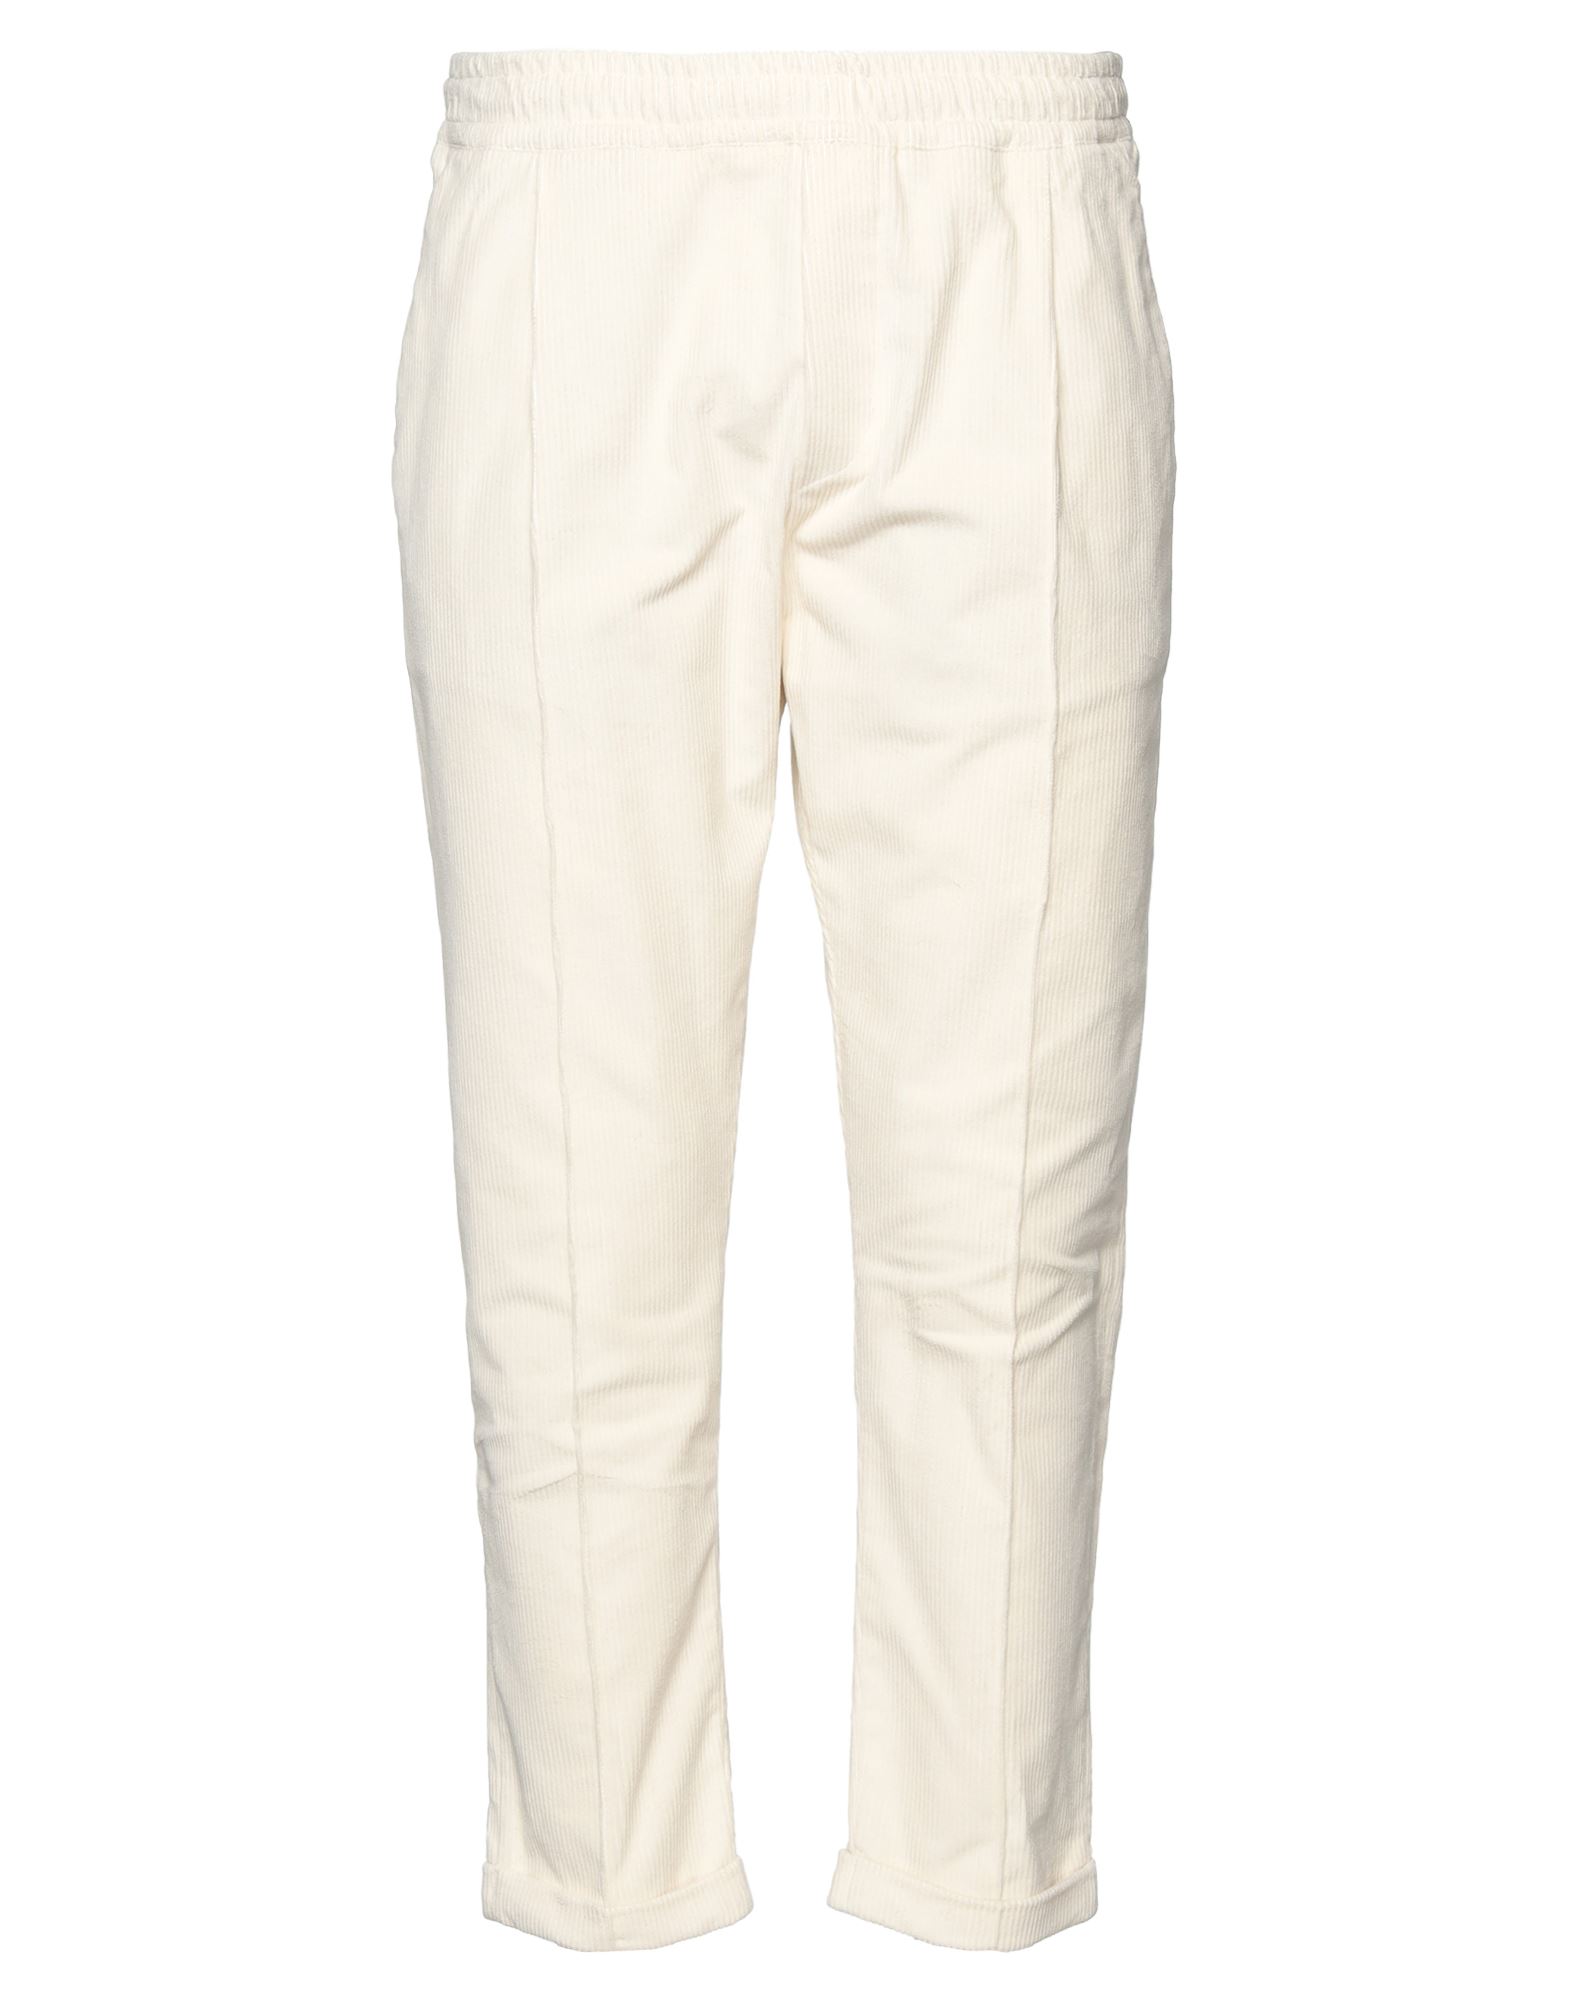 Golden Craft 1957 Pants In Ivory